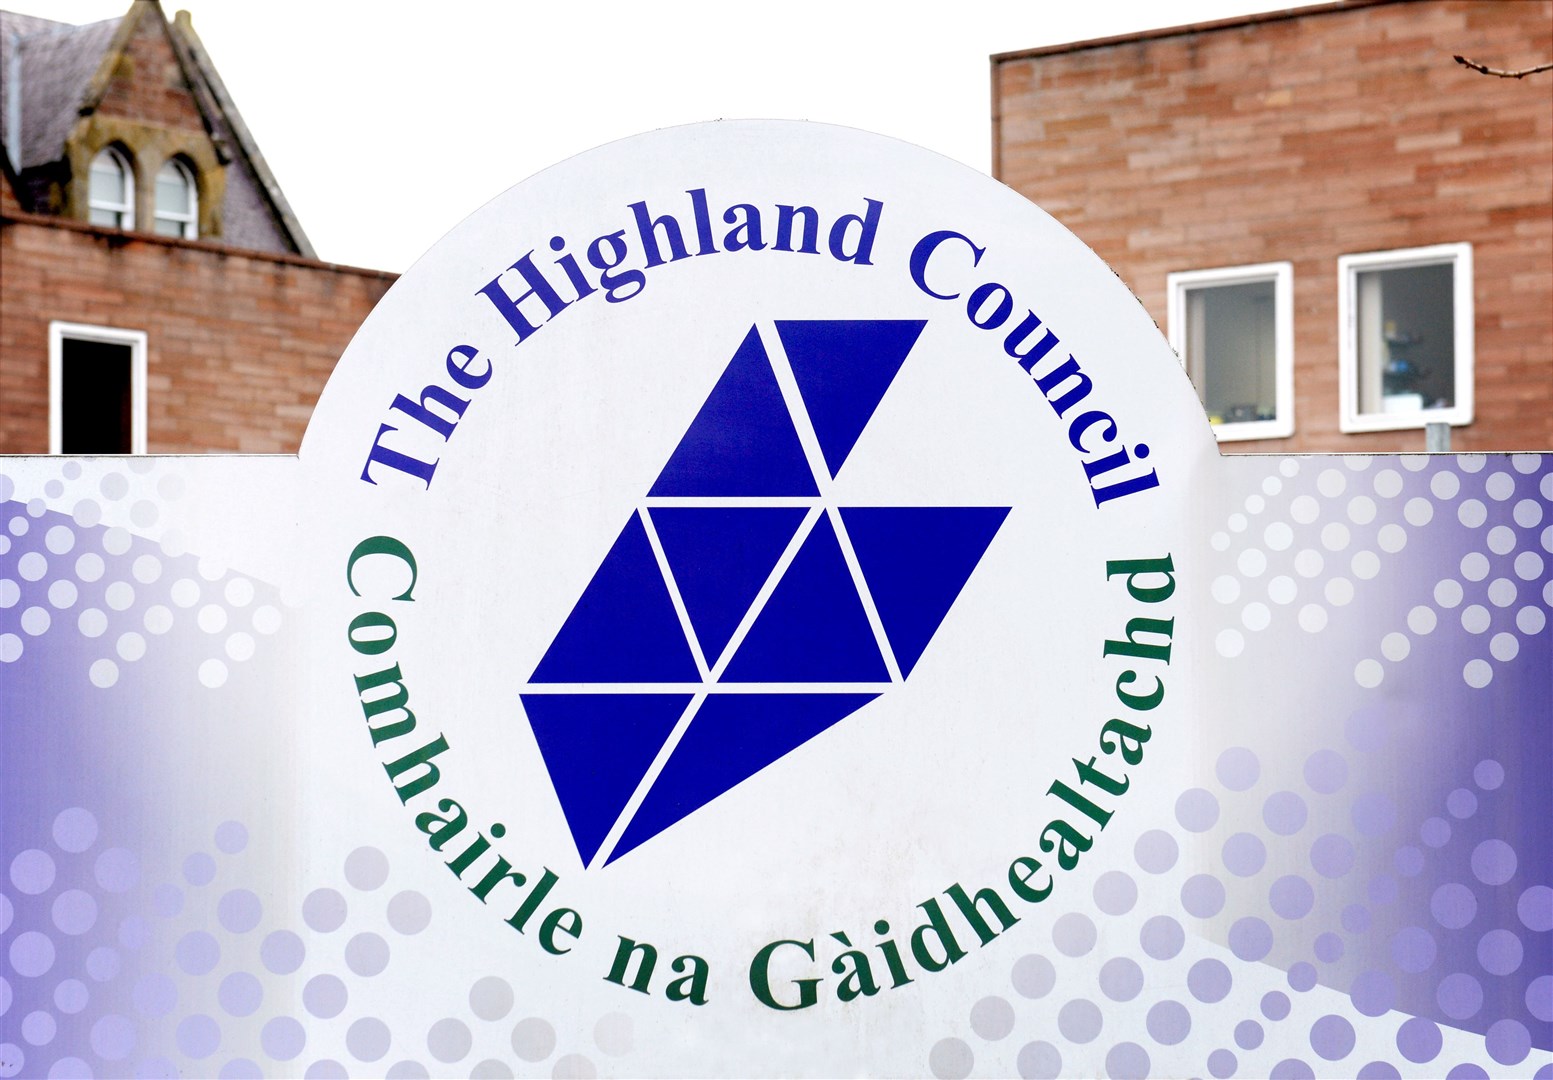 Highland Council has defended its position and insists it is paying a fair wage.